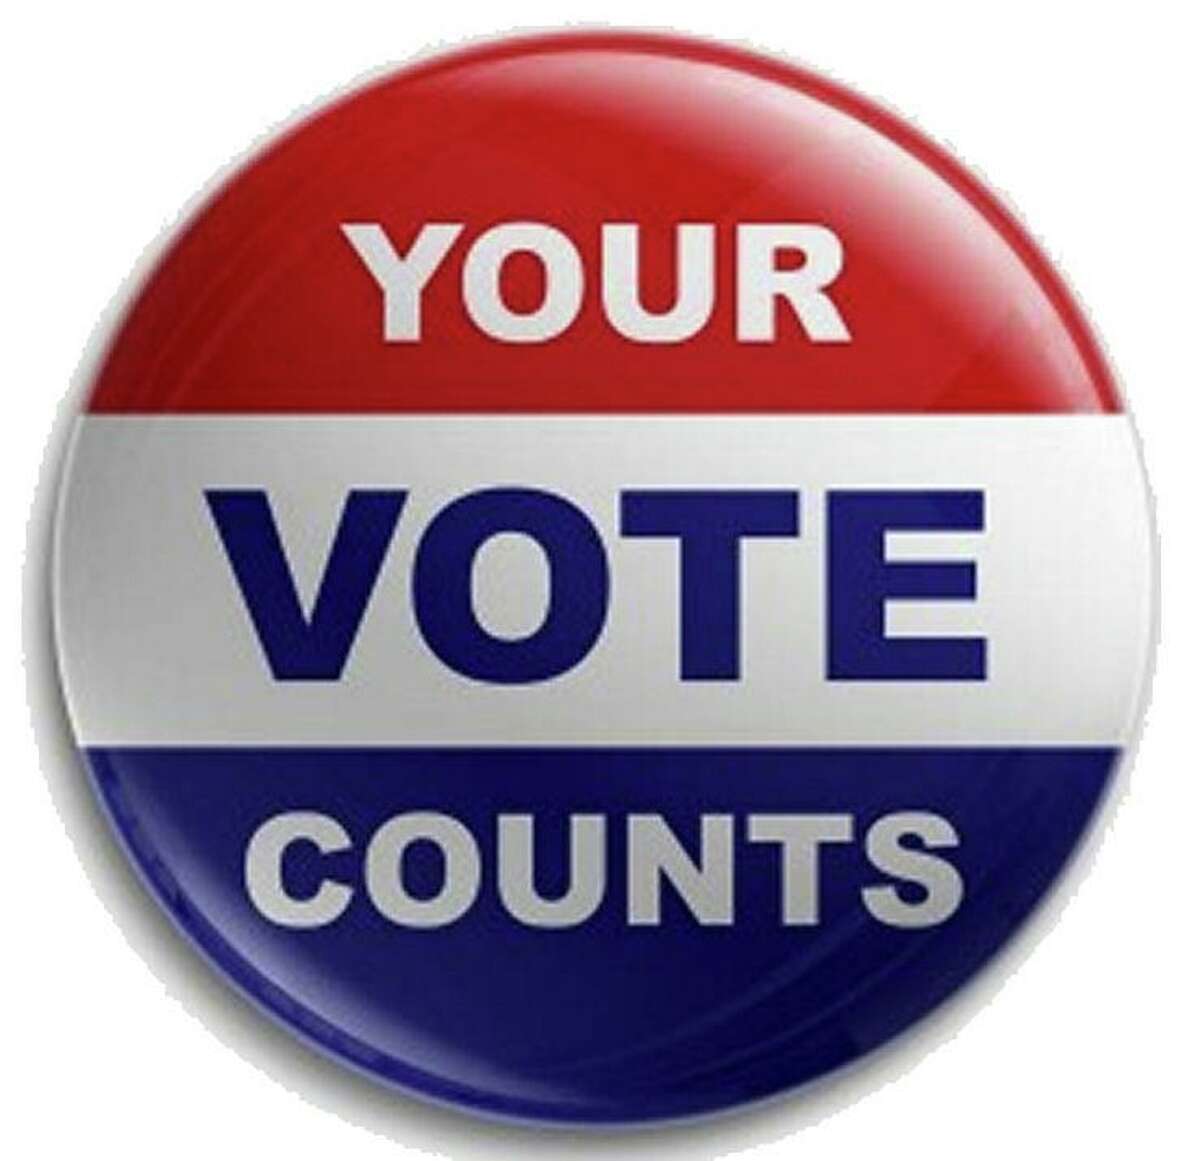 Face-masked Republicans and Democrats from all four Ridgefield voting districts will vote in-person at East Ridge Middle School on primary day, Tuesday, Aug. 11. The polling station will be open from 6 a.m. to 8 p.m.